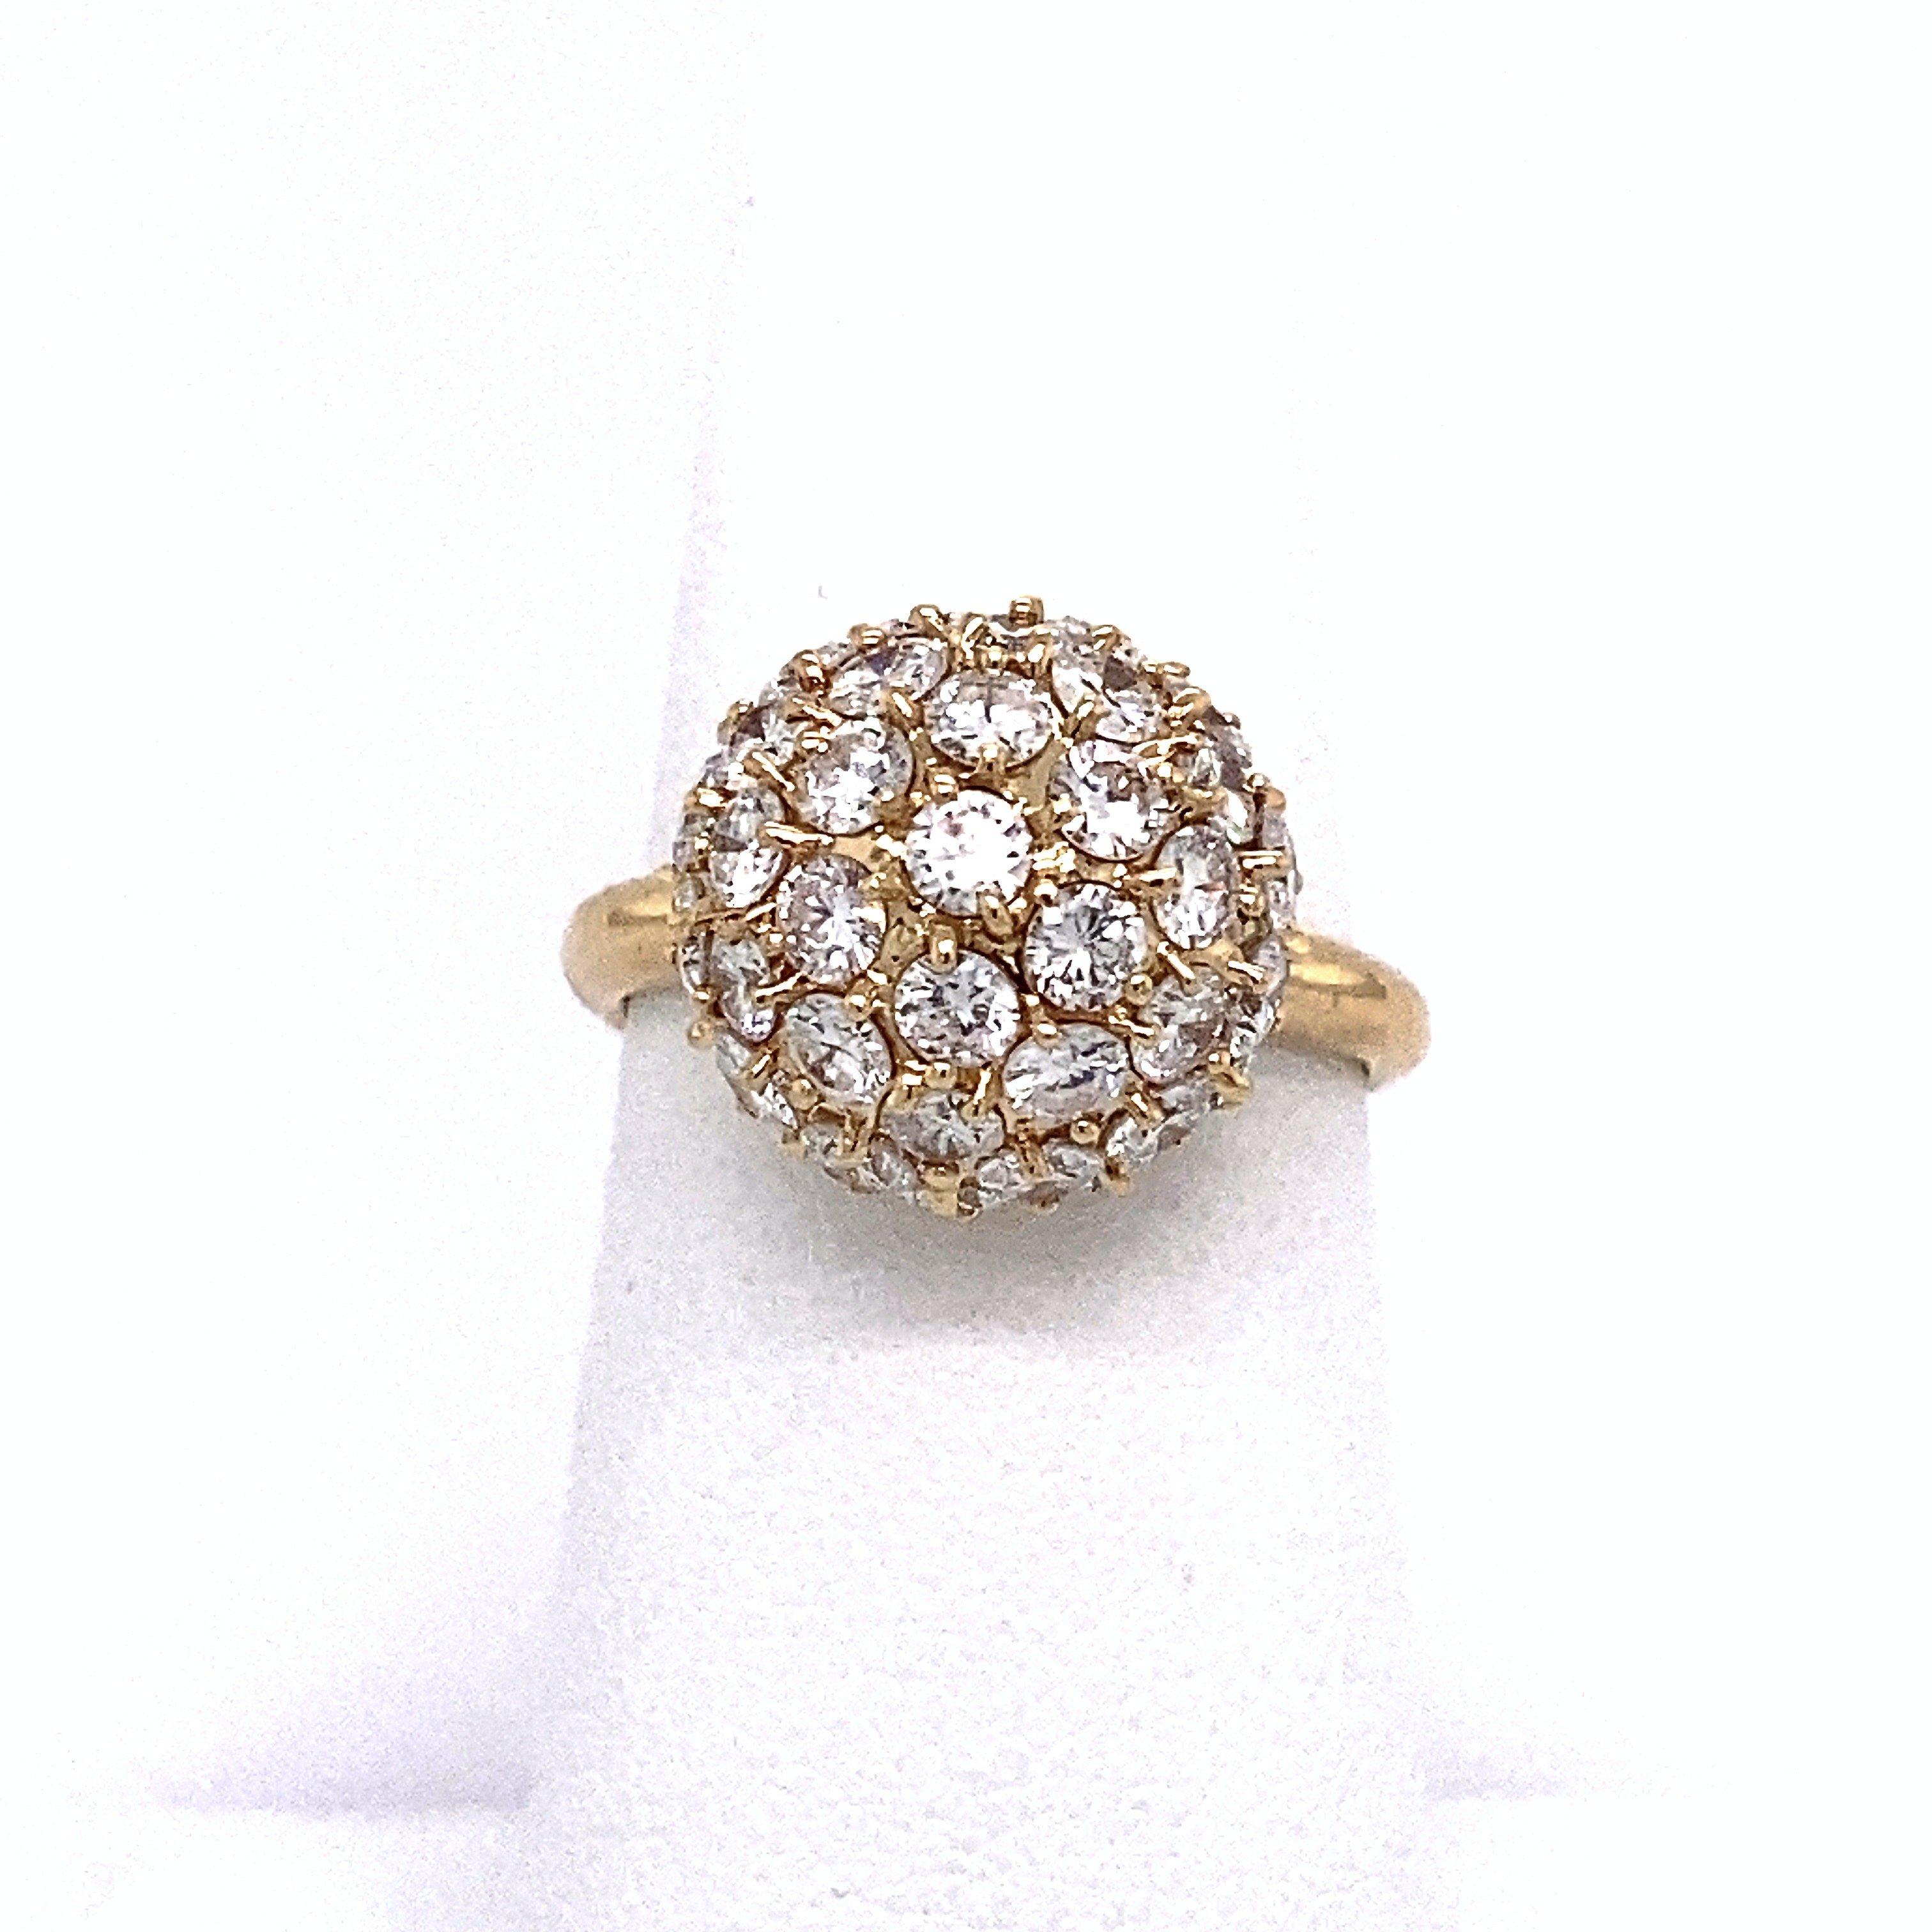 This vintage 1960's bombe ring is crafted in 18KT yellow gold and covered in 2.95CT sparking round diamonds, D-F Color, VS clarity. The ring is size 6.25 and can be resized. The top of the ring measures 13.2mm round and  9mm deep with a 2.6mm wide